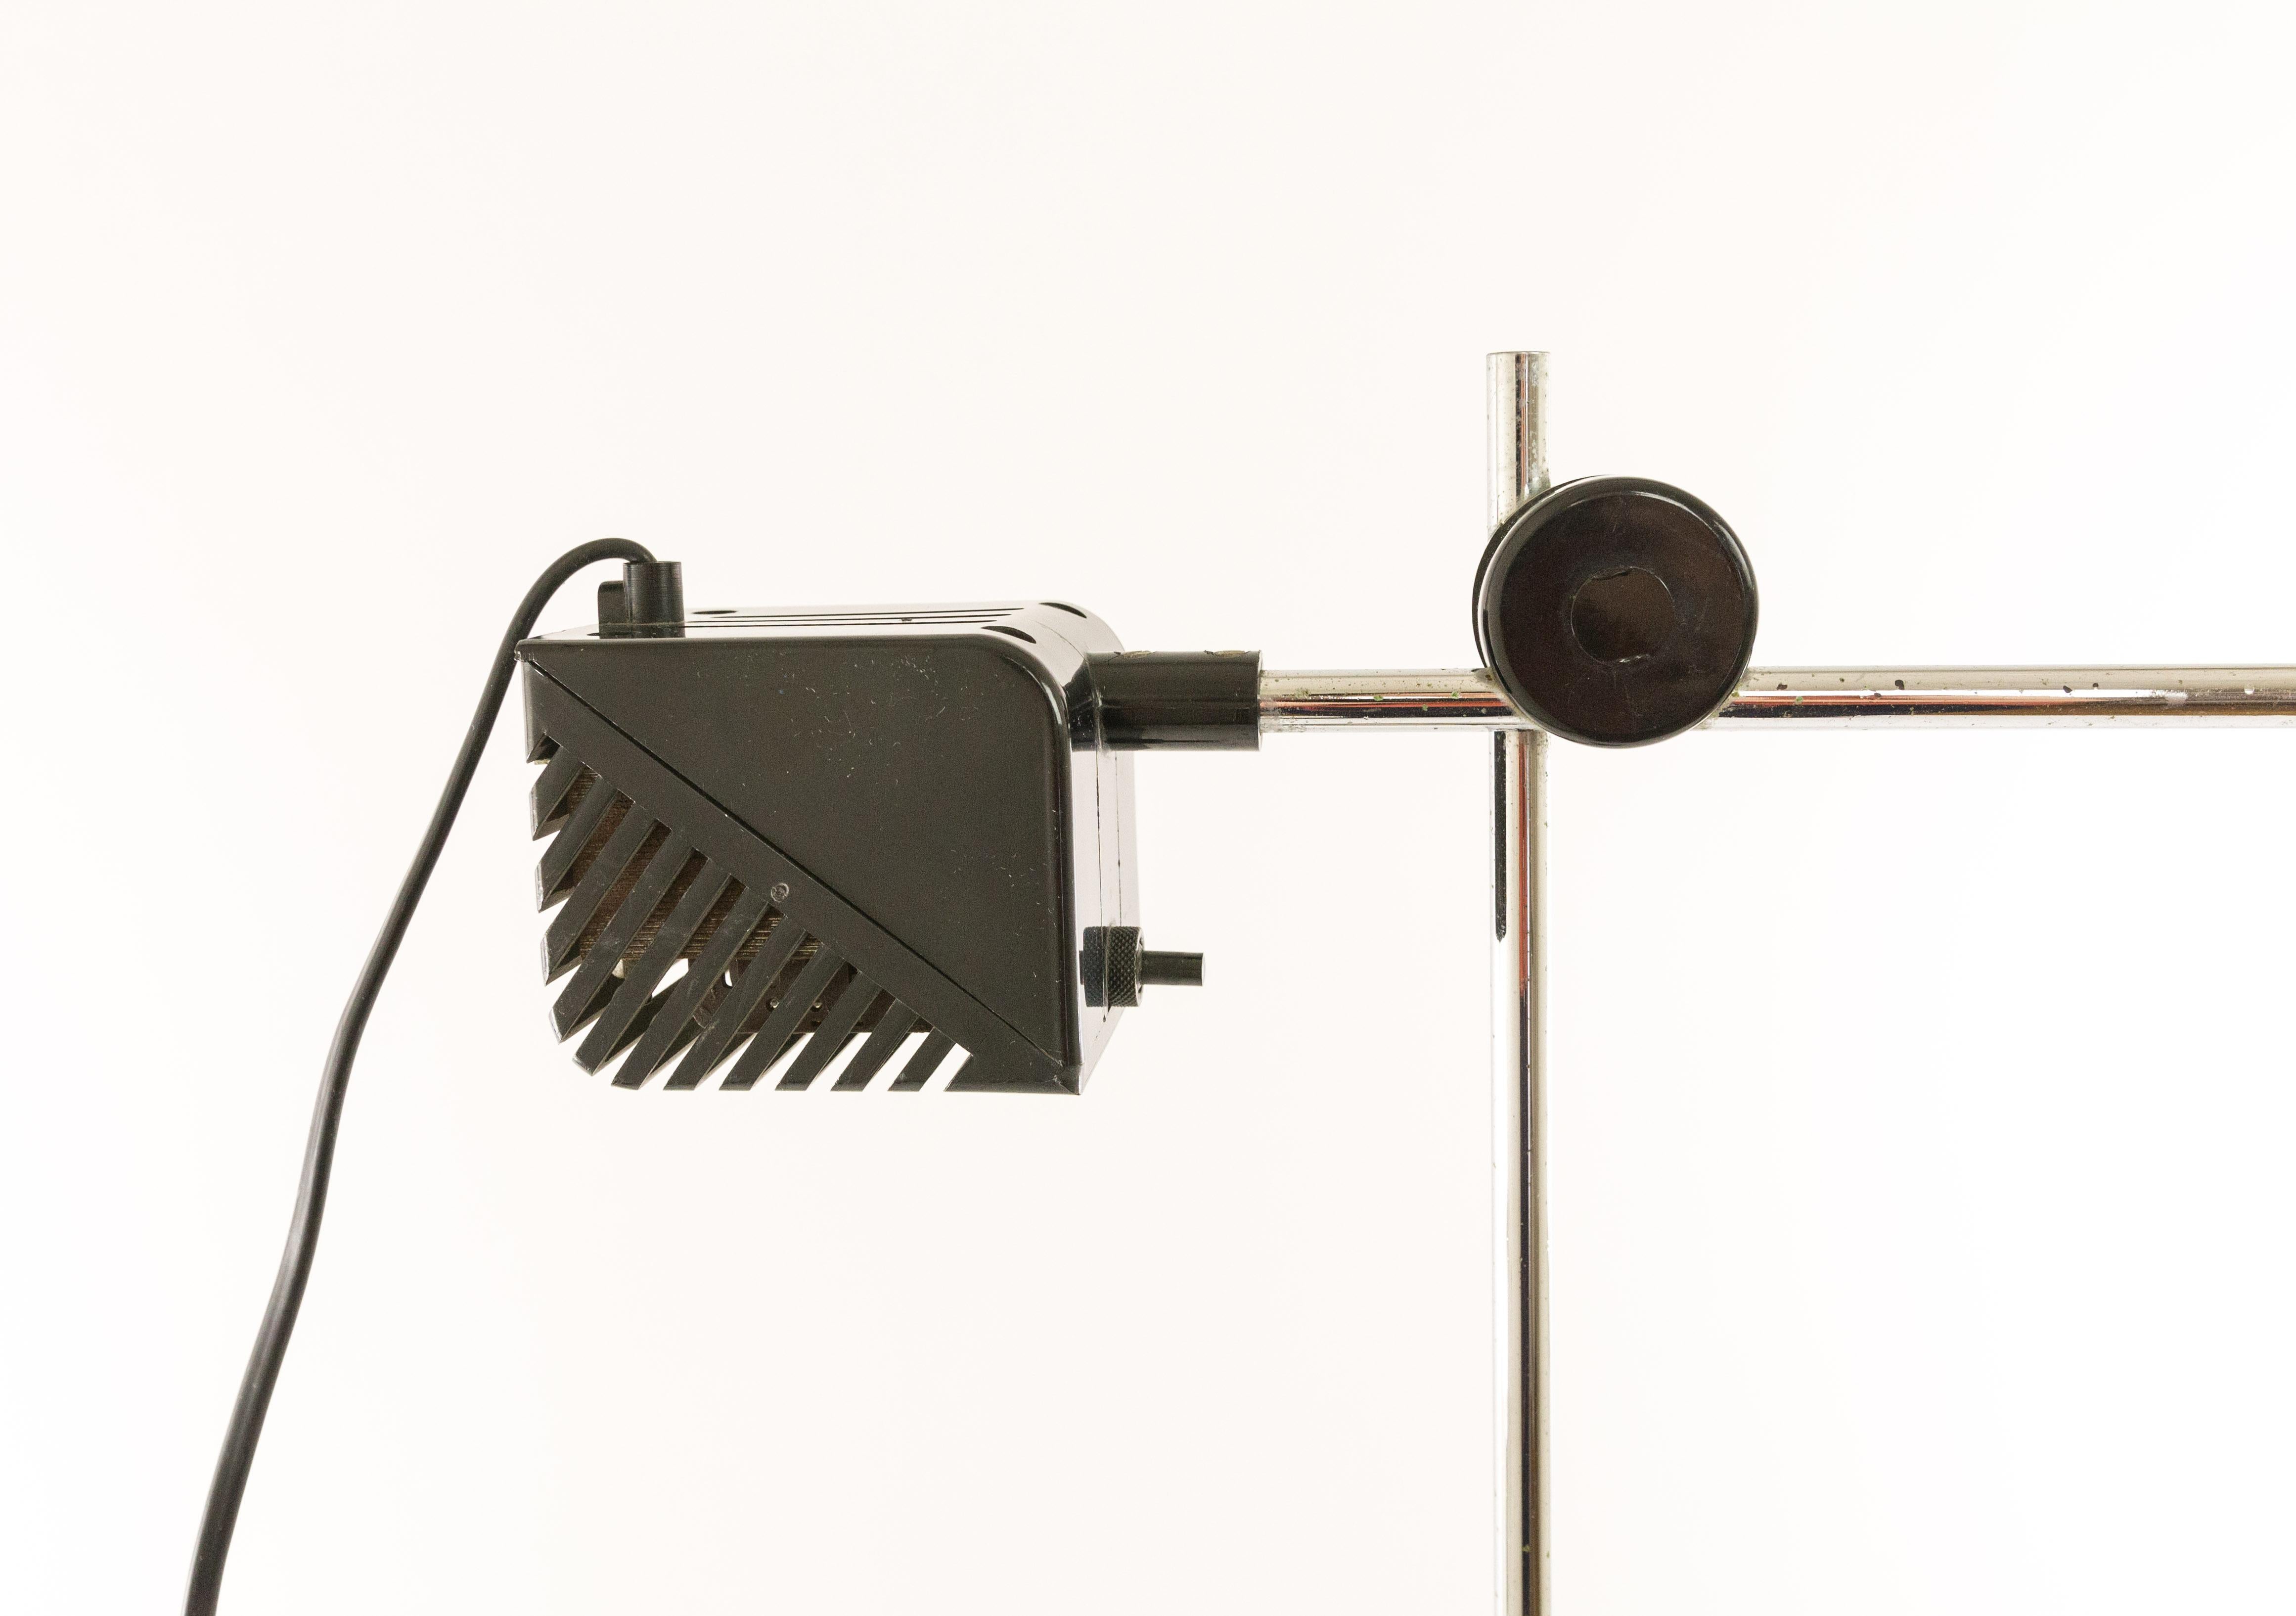 Metal Pair of Maniglia Floor Lamps by De Pas, D'Urbino and Lomazzi for Stilnovo, 1970s For Sale